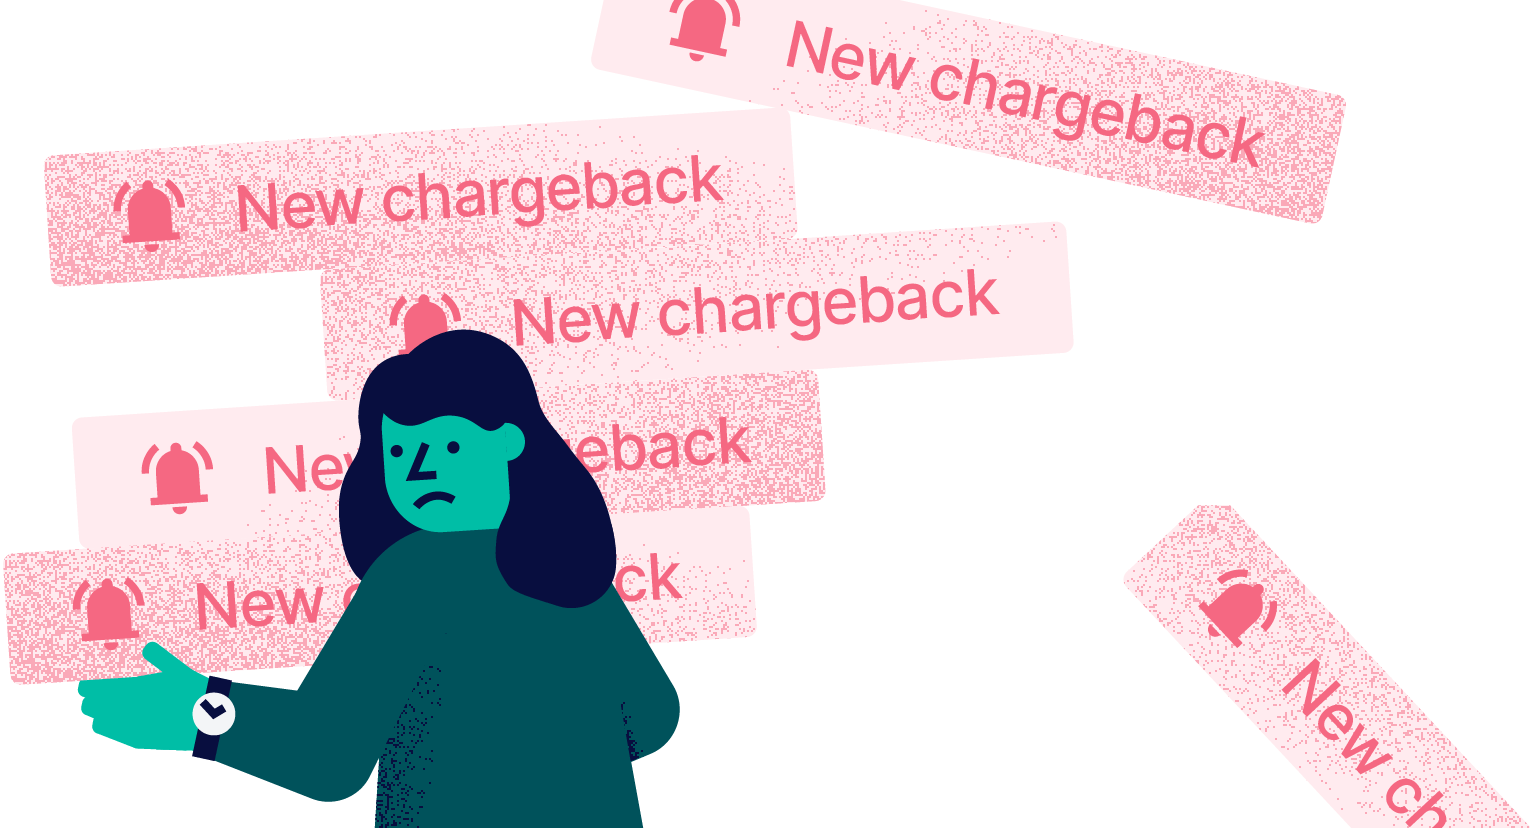 Cutting through chargeback chaos: Top tips to streamline chargeback management 